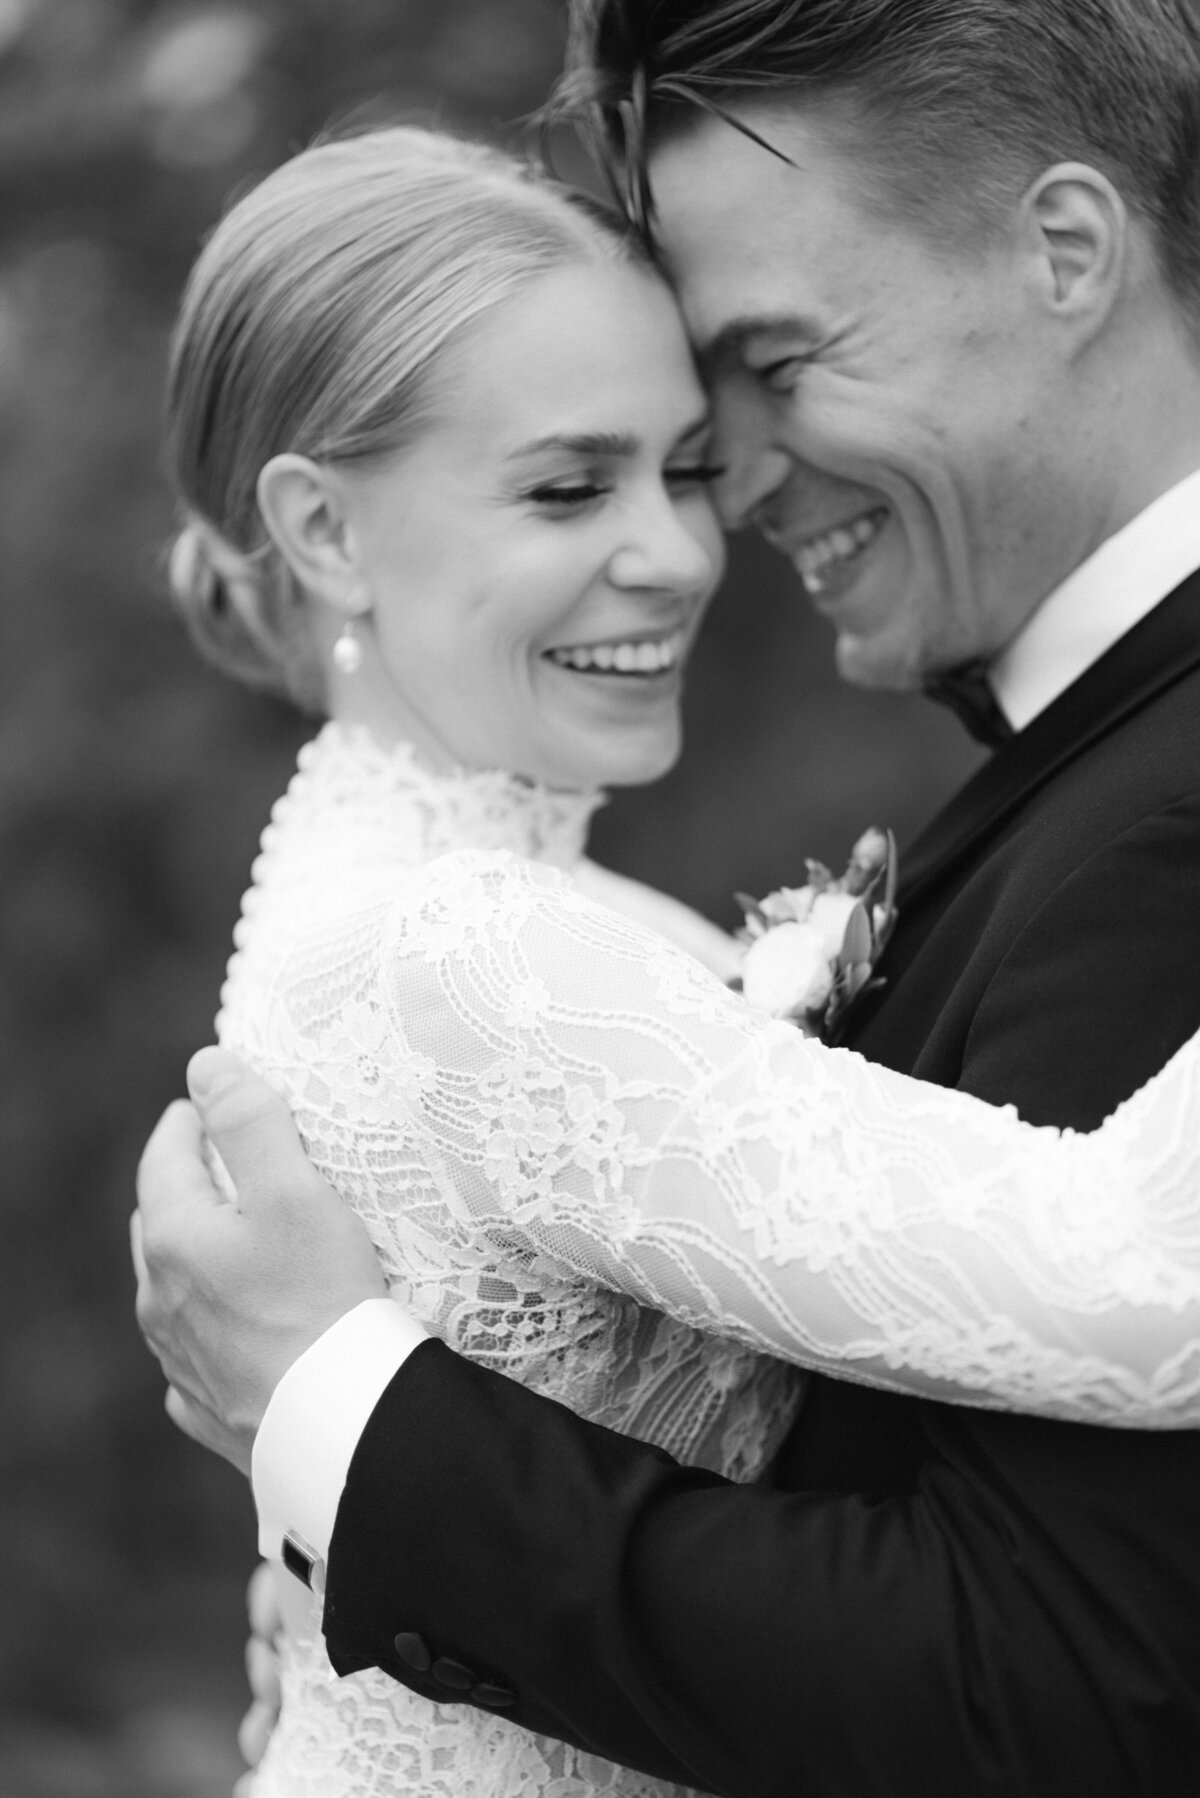 Bride and groom laughing in their wedding photography session with photographer Hannika Gabrielsson.